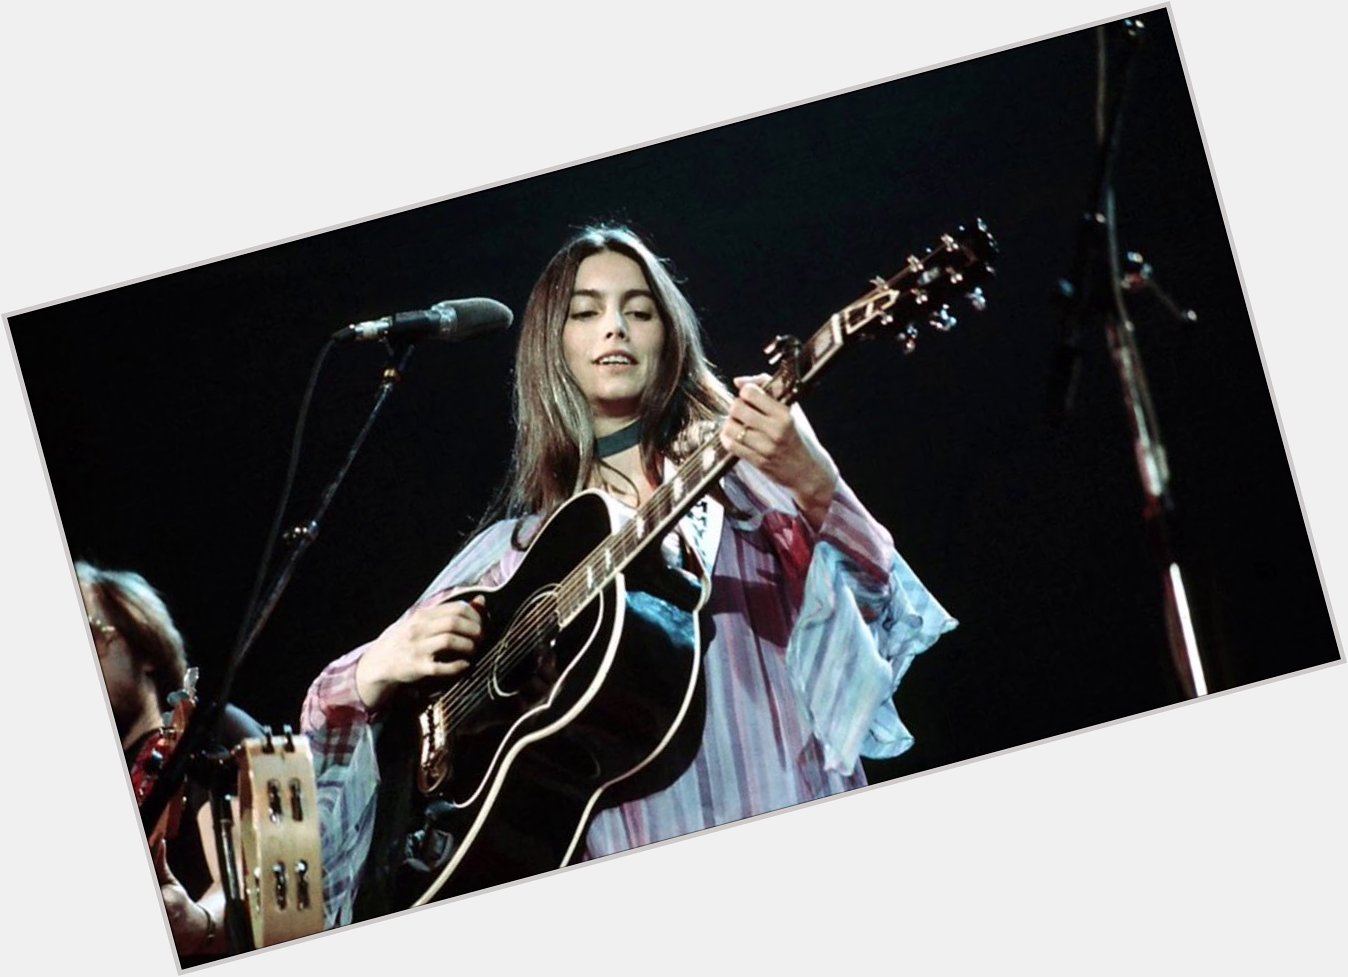 Happy Birthday Emmylou Harris!
What are your favorite songs / lyrics? 